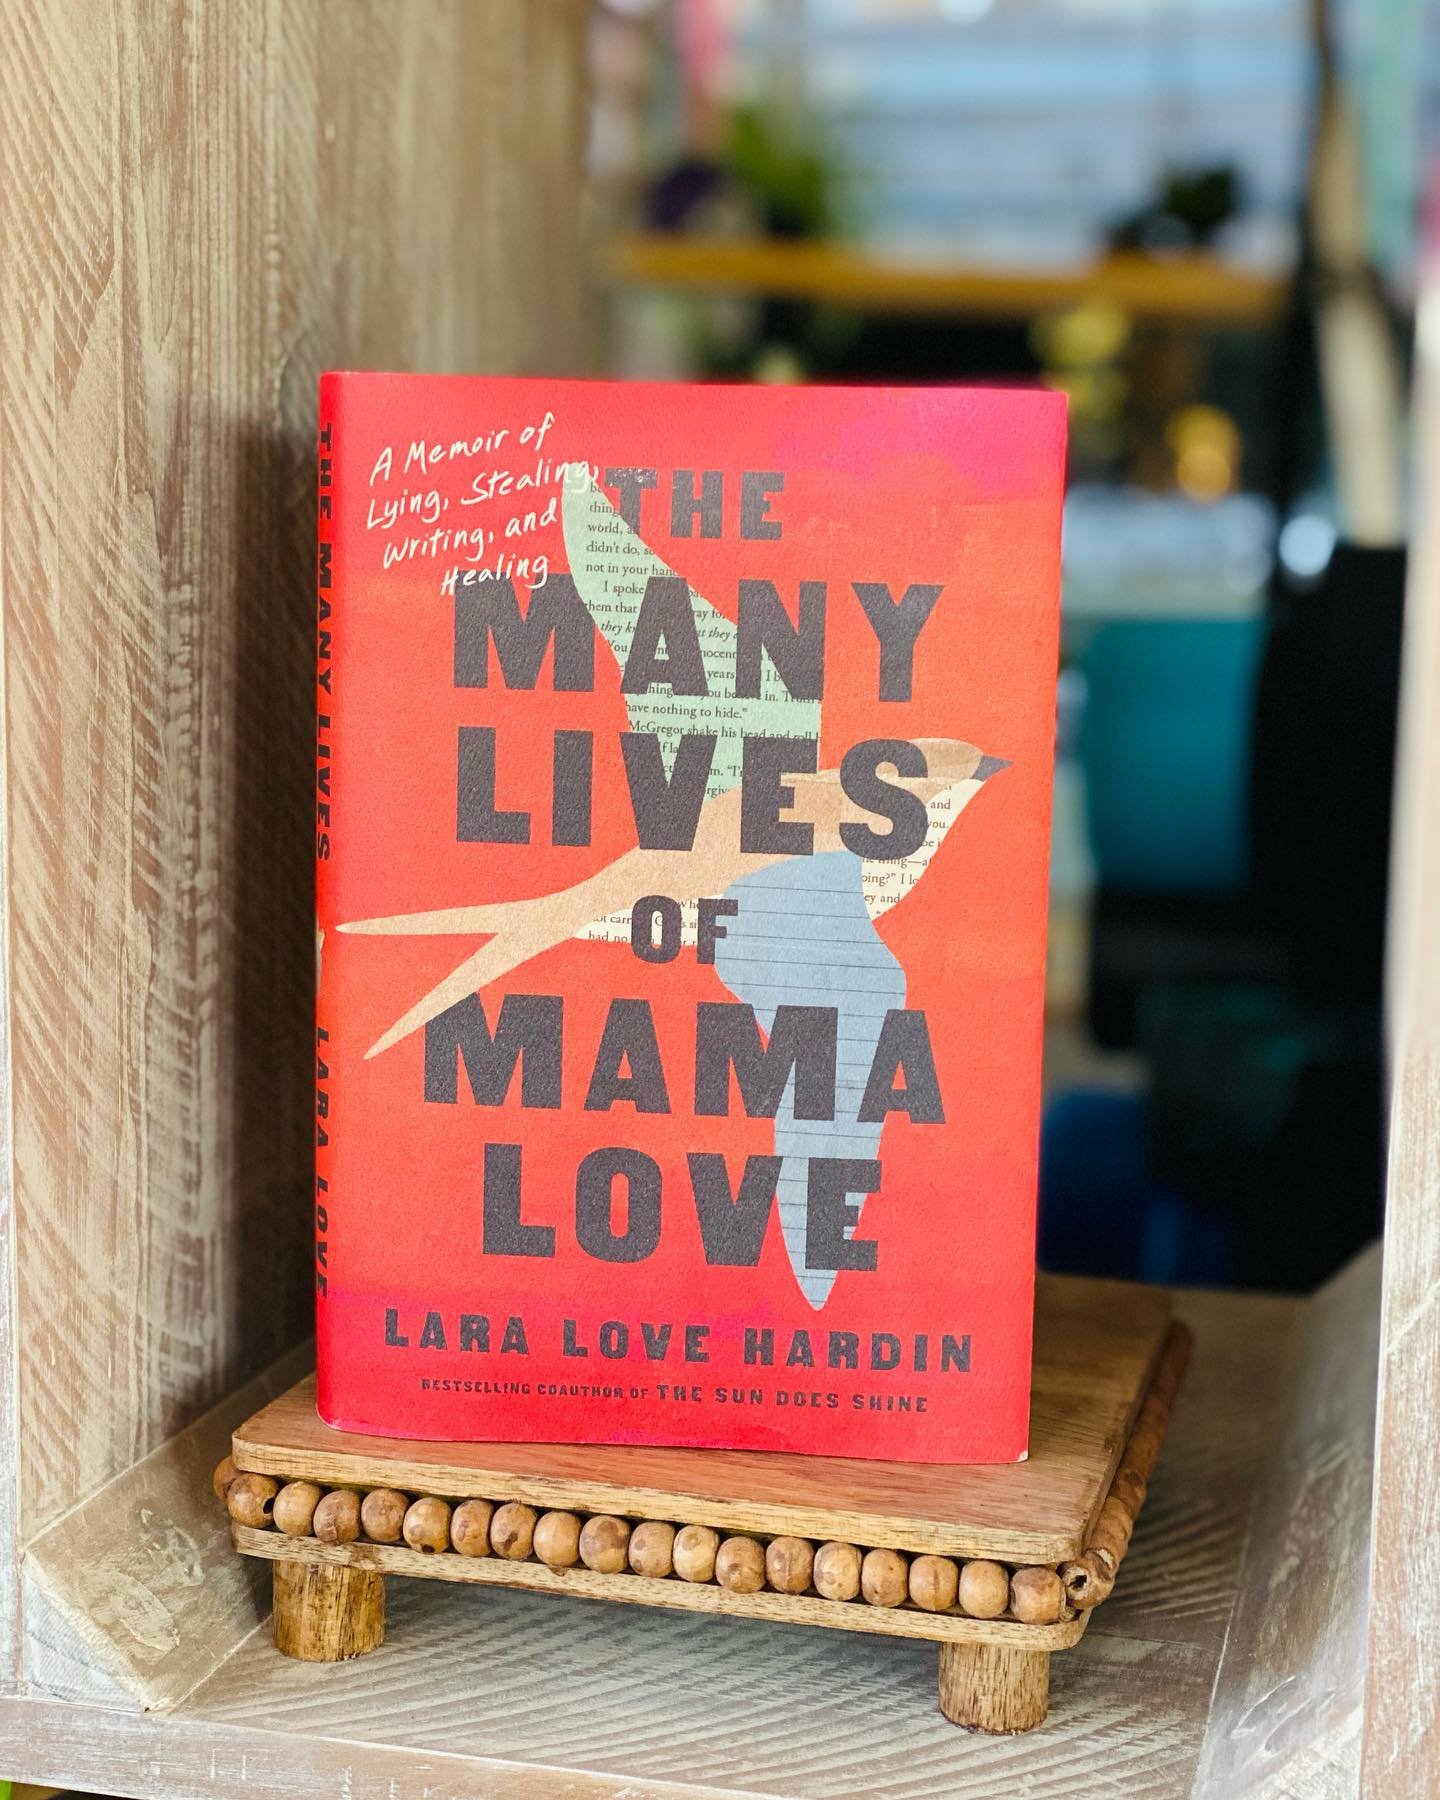 Bulates next book club pic! Feb 27th be ready for some fun discussion and wonderful company 🙏 #bulatesbookclub #bulatesmalibu #malibu #bookclub #manylivesofmamalove #&hearts;️